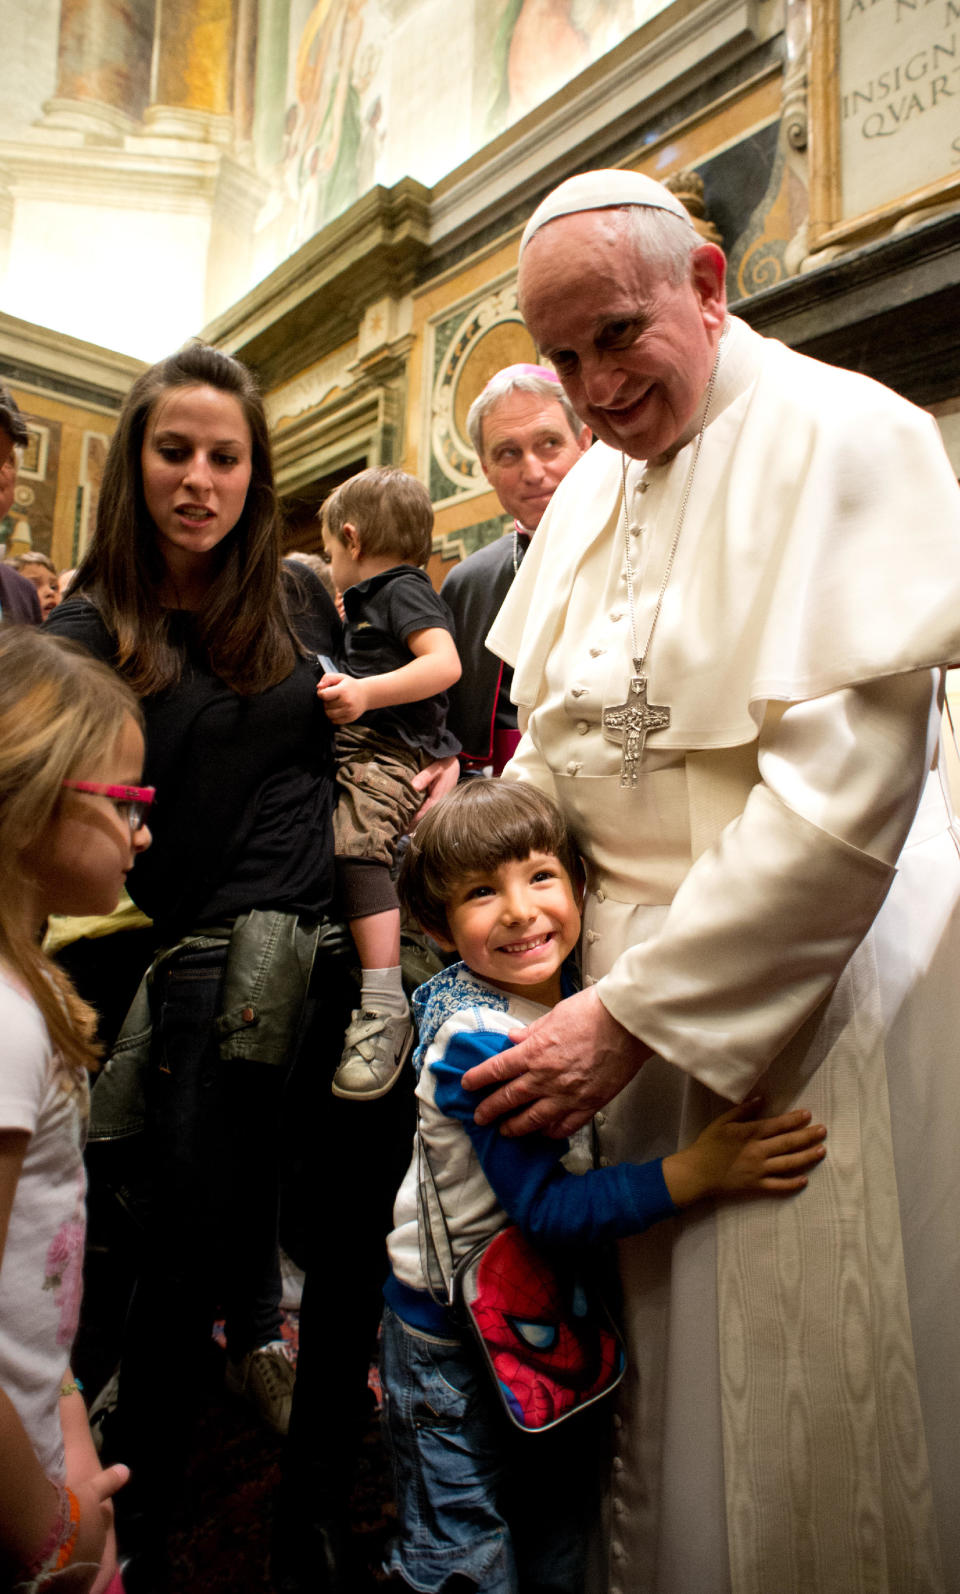 In this photo released by Vatican newspaper L'Osservatore Romano, Pope Francis hugs a child during a meeting with the Italian pro-life movement, at the Vatican Friday, April 11, 2014. (AP Photo/L'Osservatore Romano)